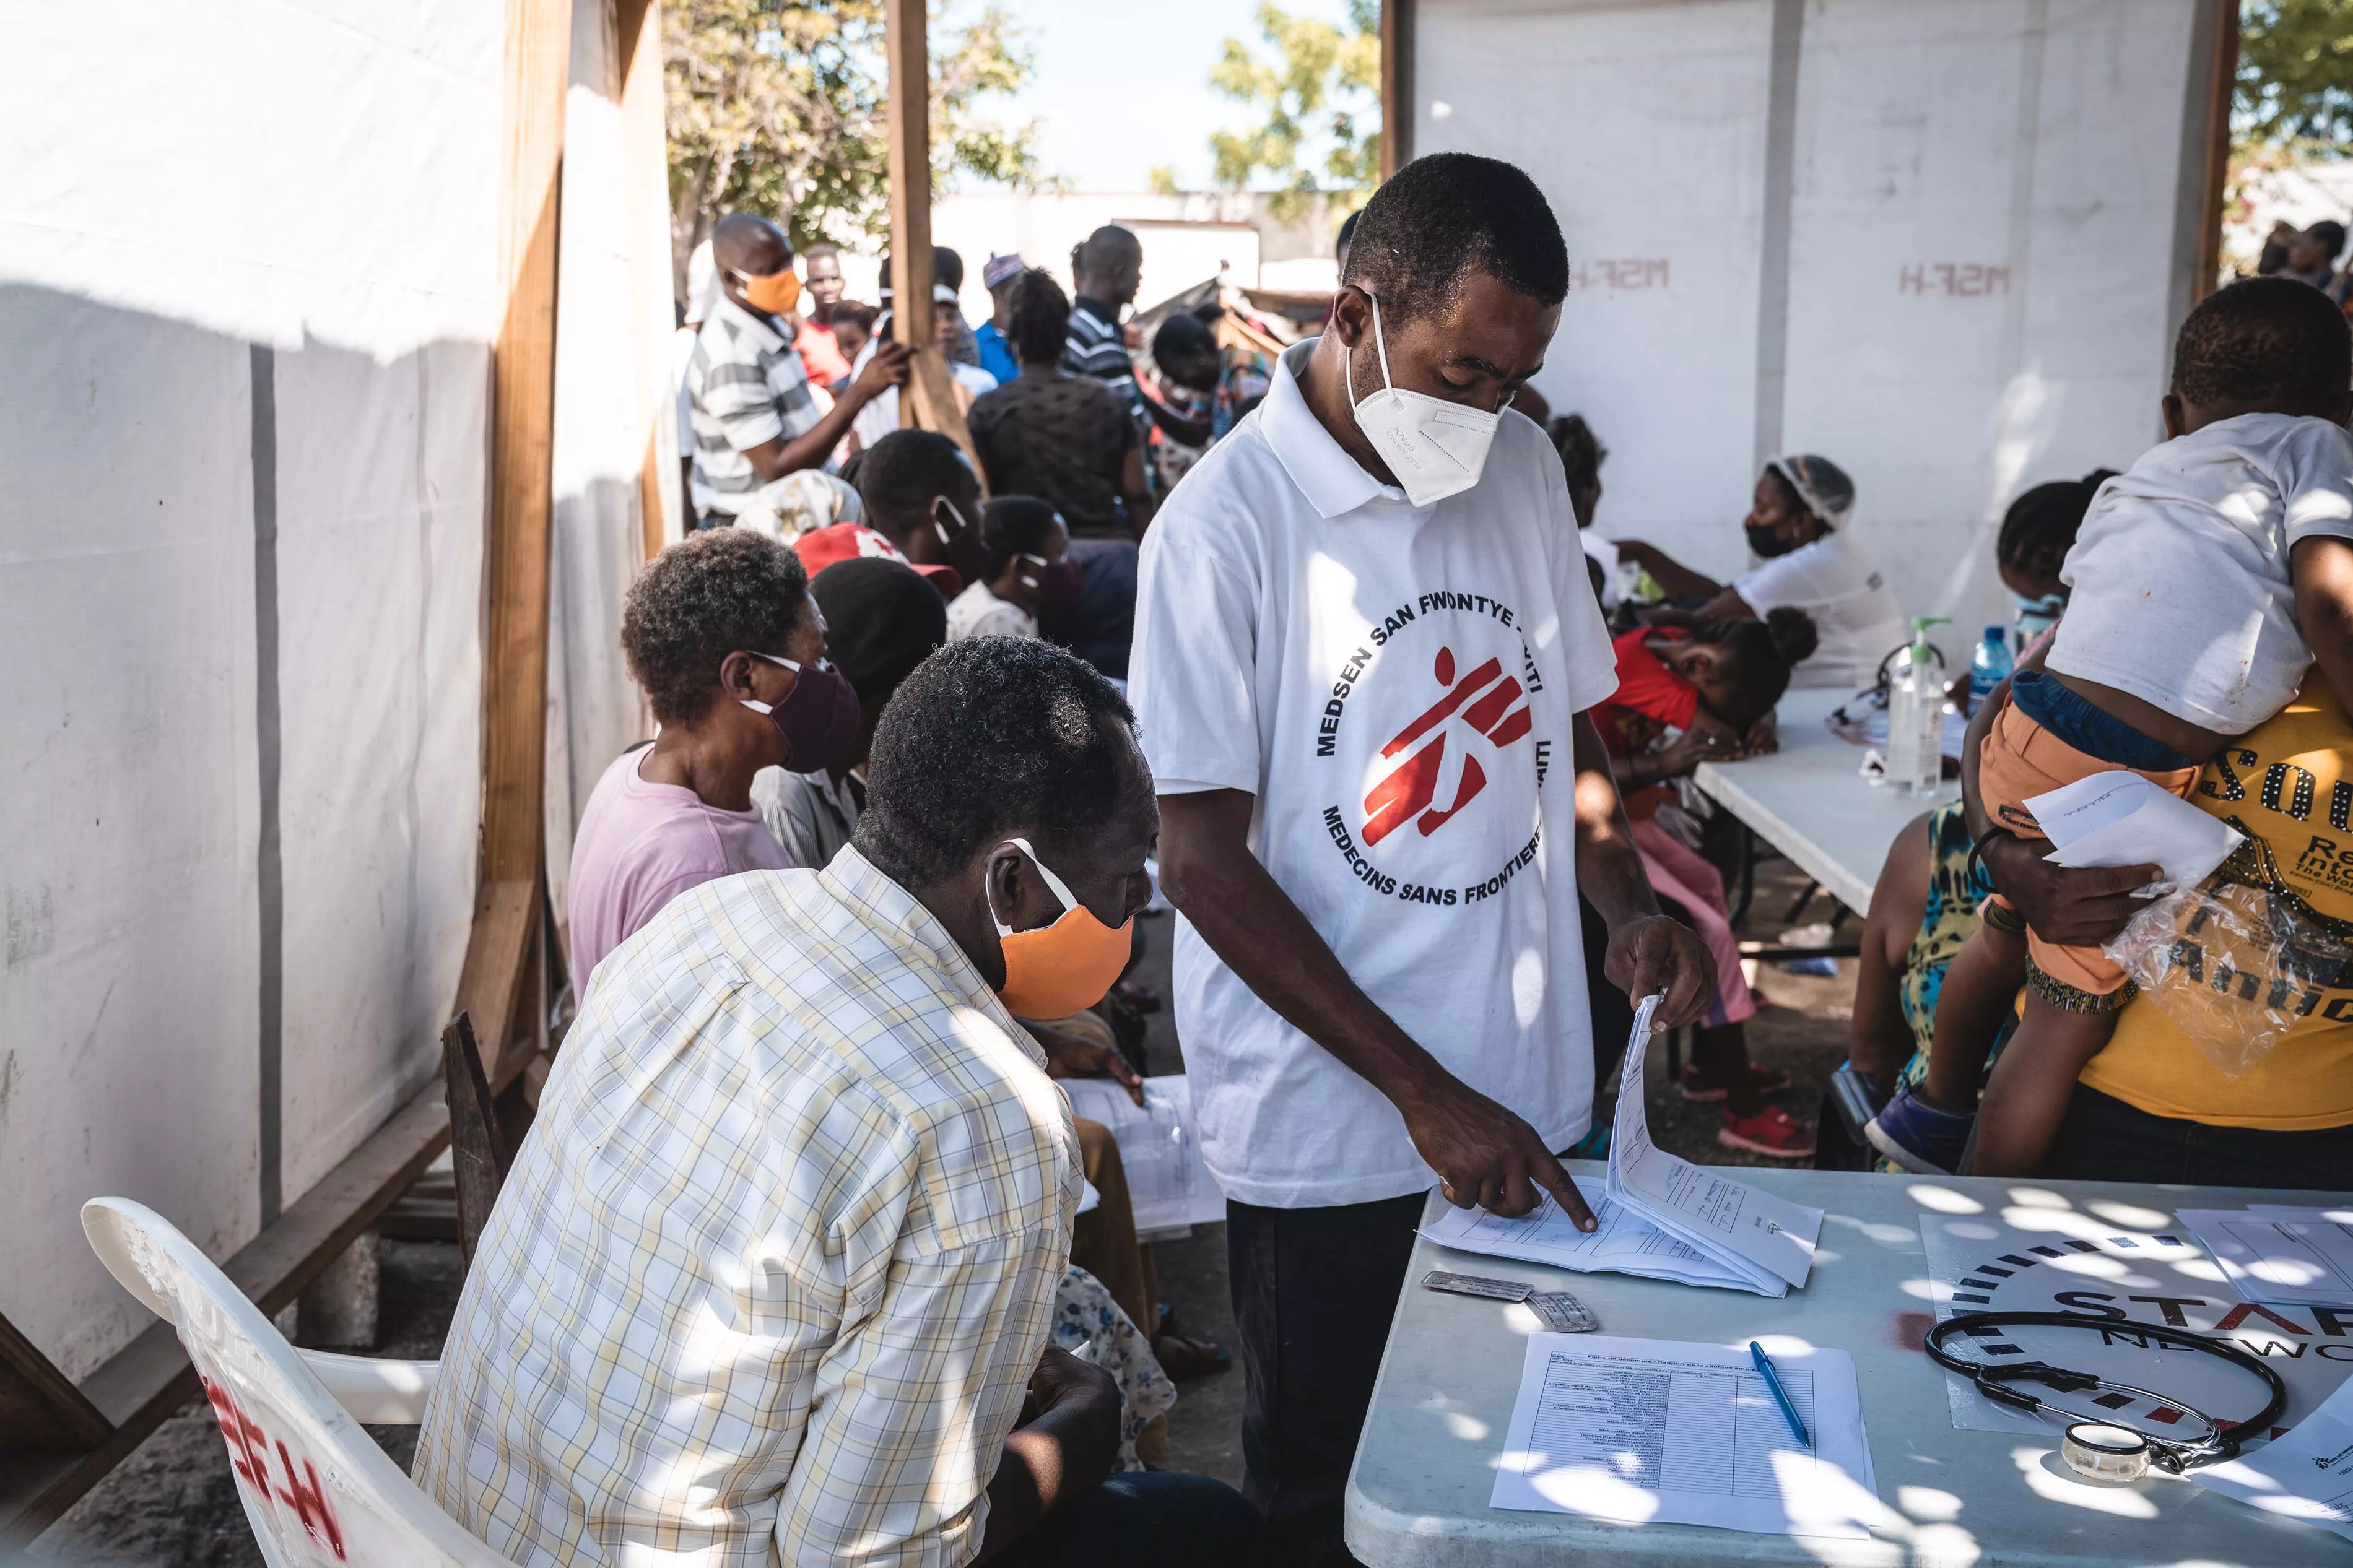 MSF Medical Doctor, Mayard Mitial, consults with a patient in St Yves, Delmas 5 displaced persons camp in Port au Prince, Haiti, where around 1,100 people live.